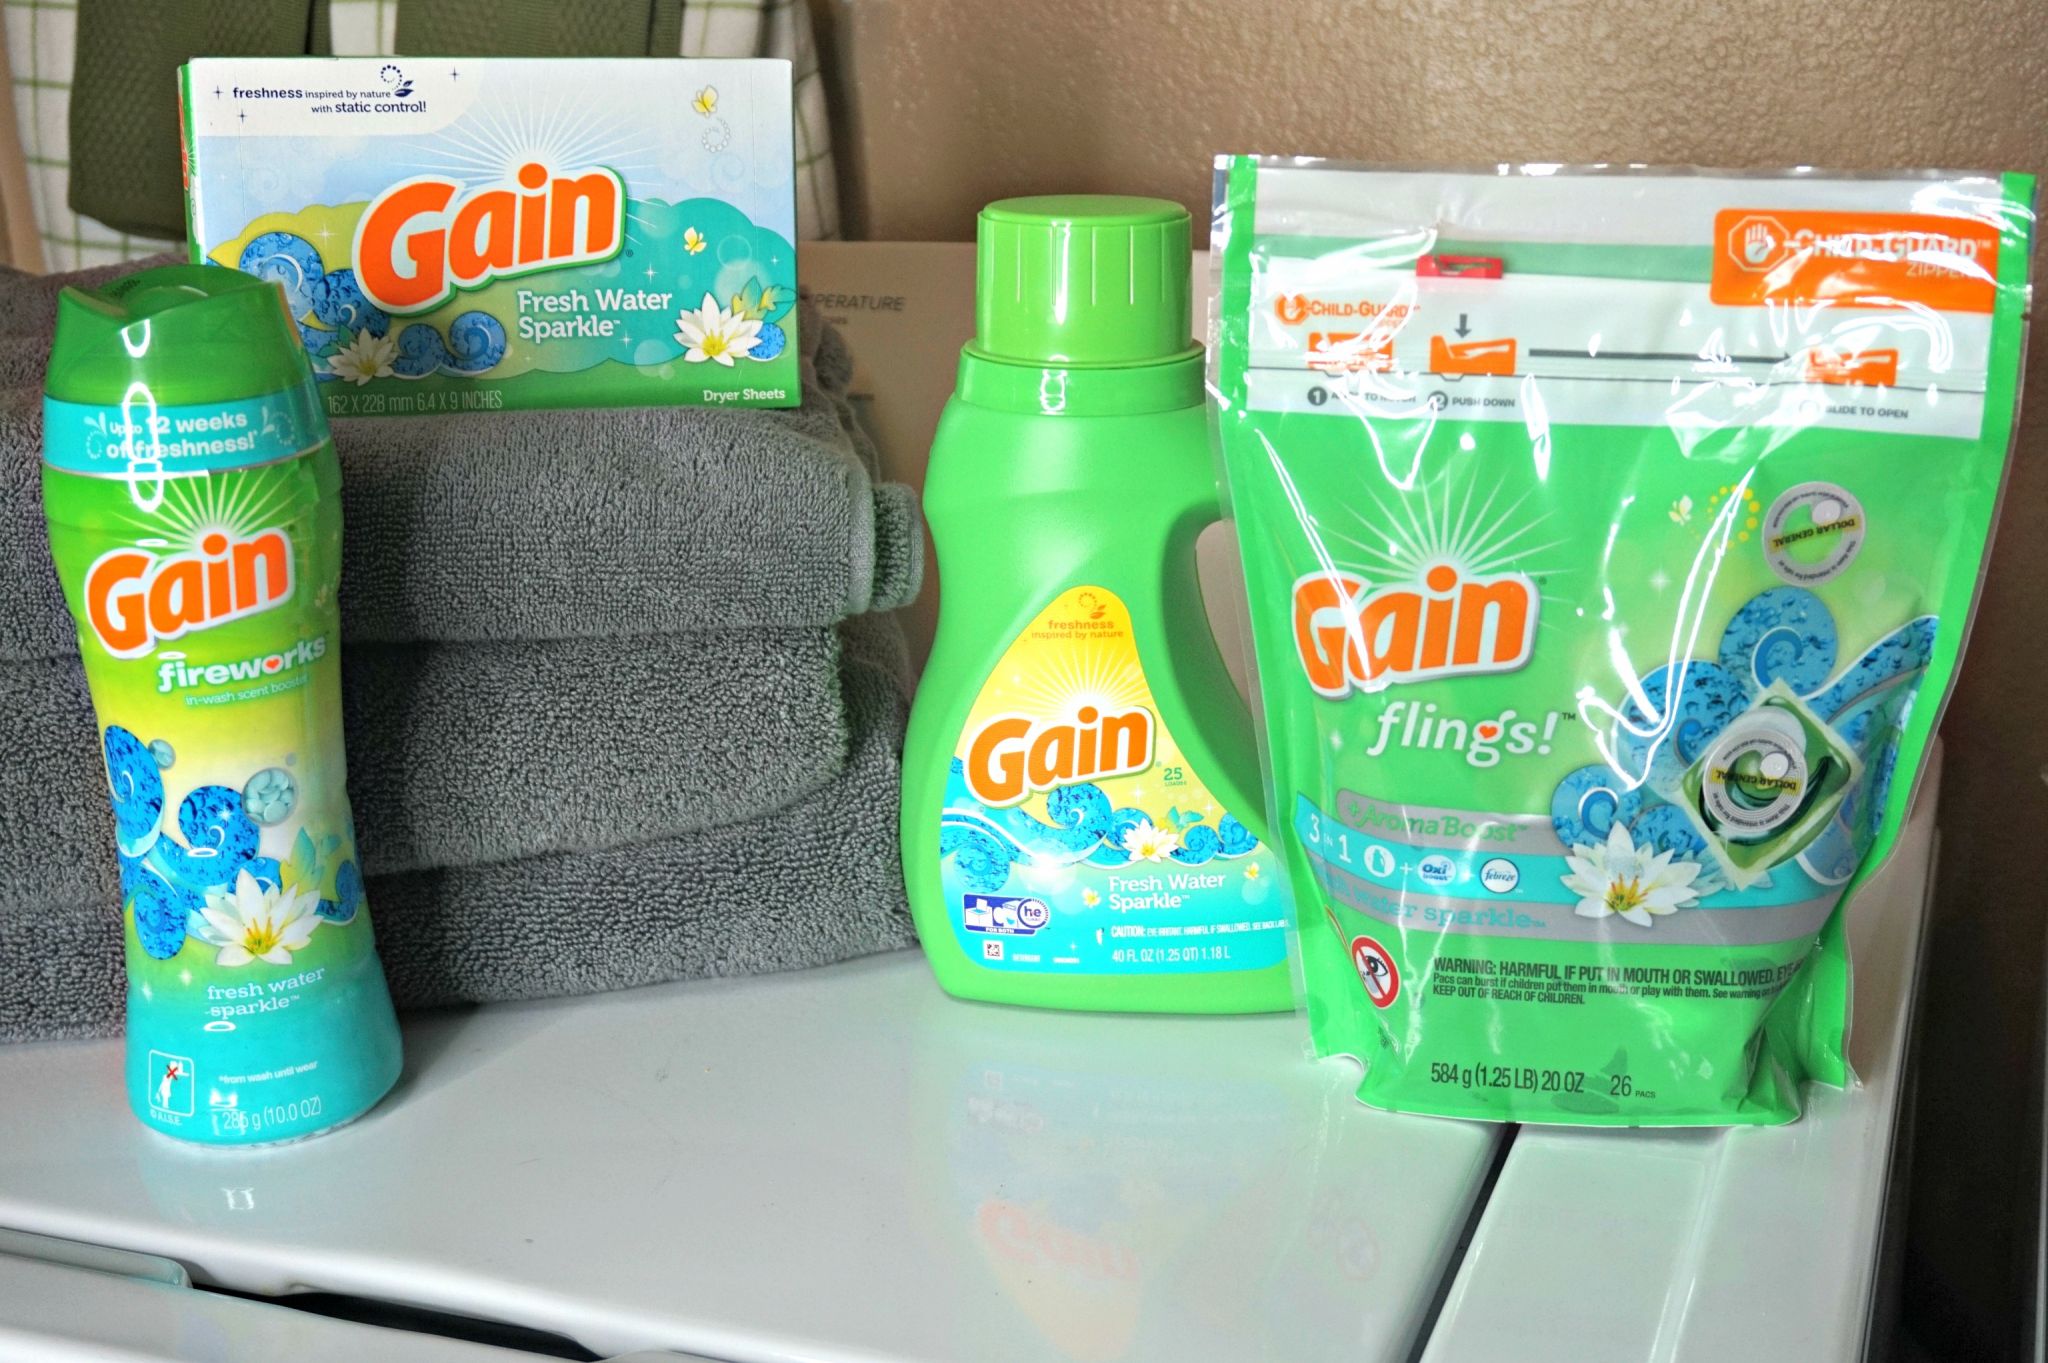 How To Keep A Clean Home // Habits of People Who Always Have A Clean Home // Cleaning Tips & Tricks // Cleaning Hacks | Beauty With Lily #ad #SparkleWithGain #ILoveGain